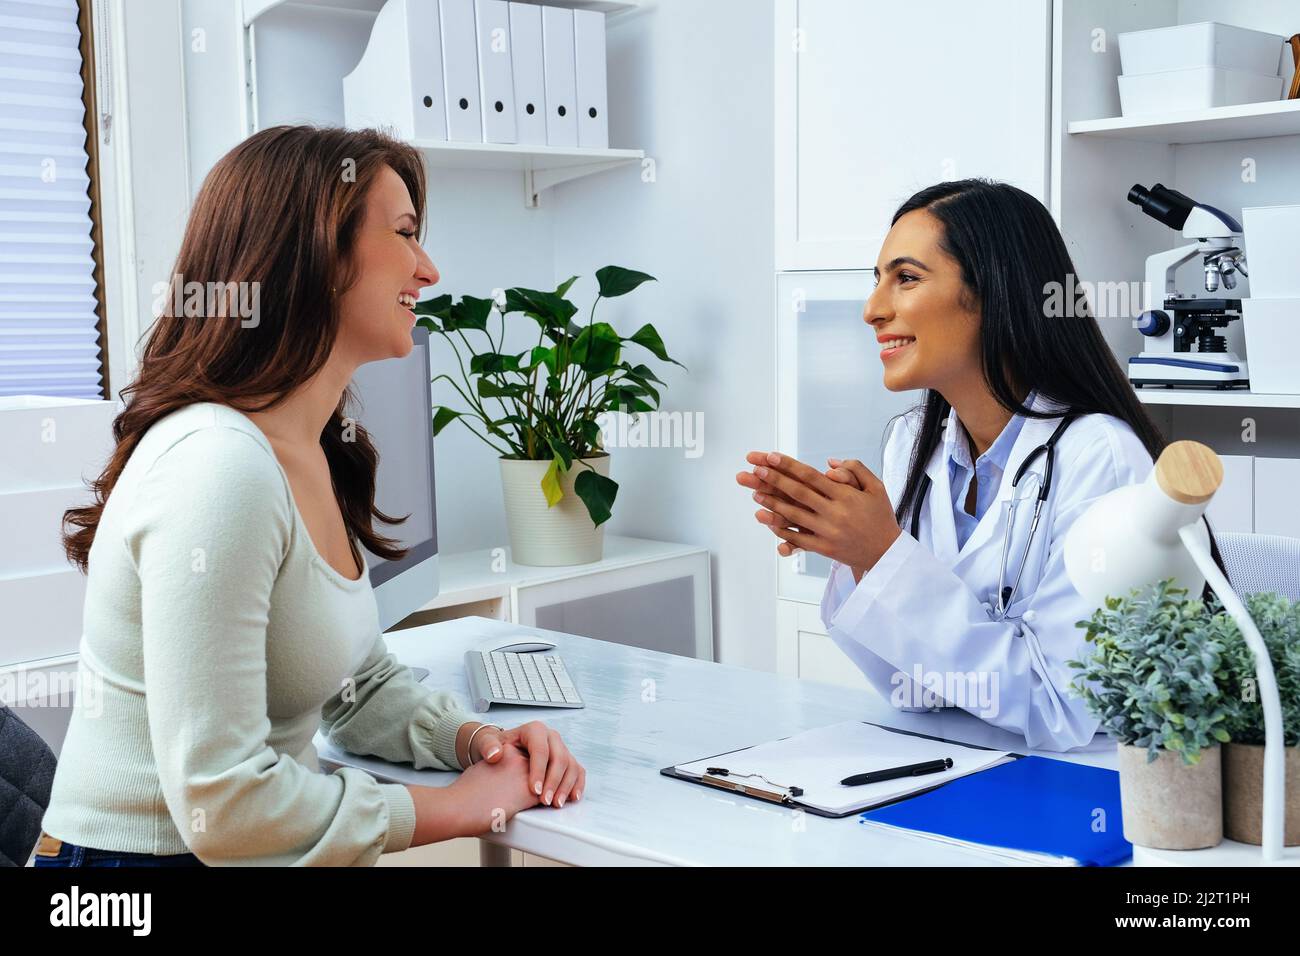 Laughing female doctor and lady client patient discussing something while sitting at the table in medical center healthcare industry Stock Photo